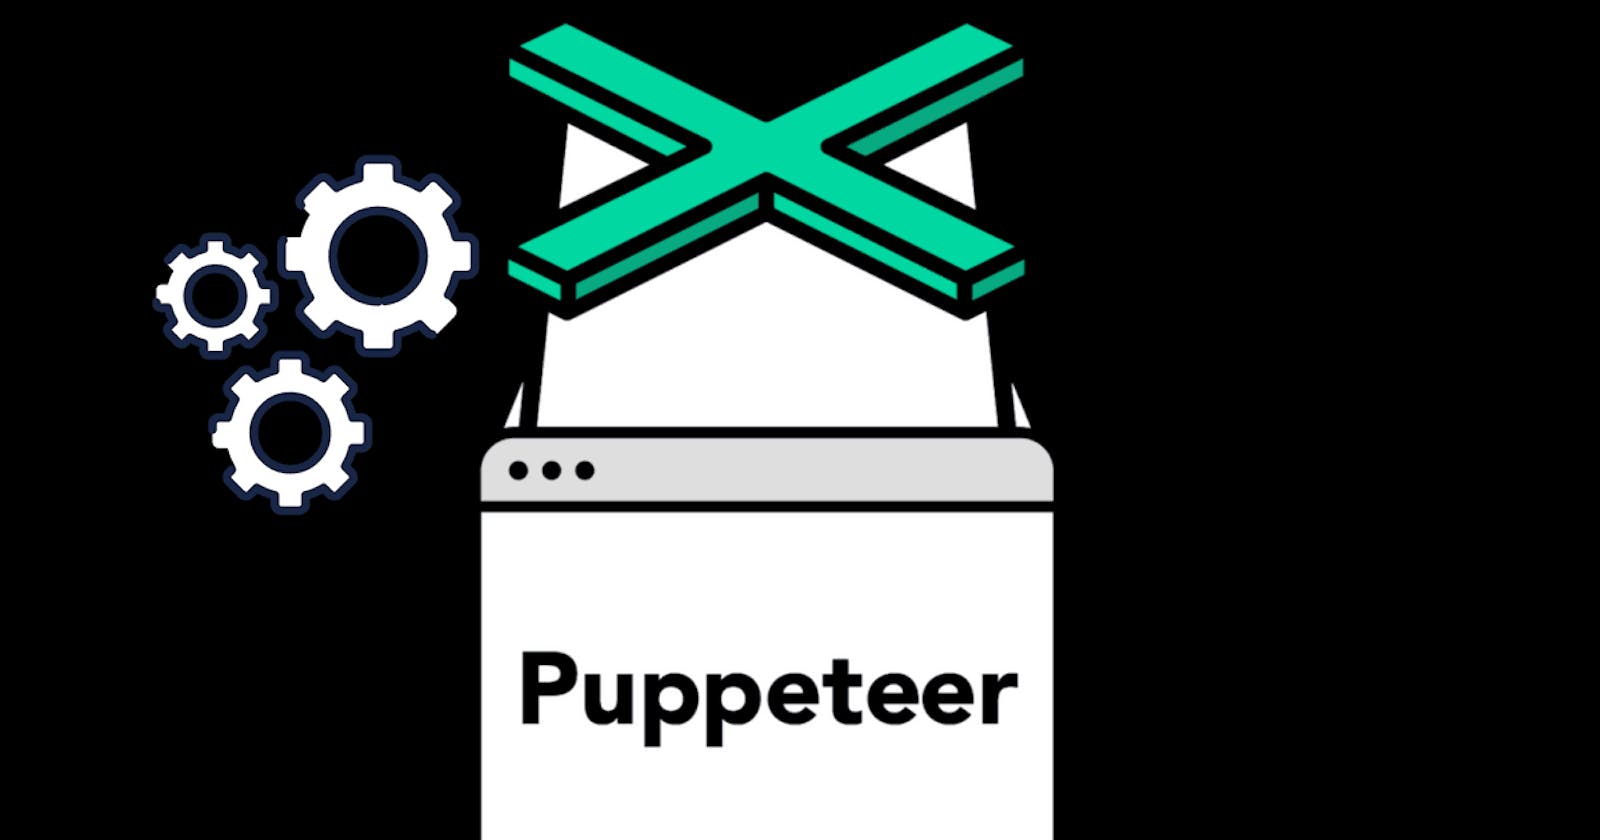 Puppeteer: Empowering Web Automation and Testing